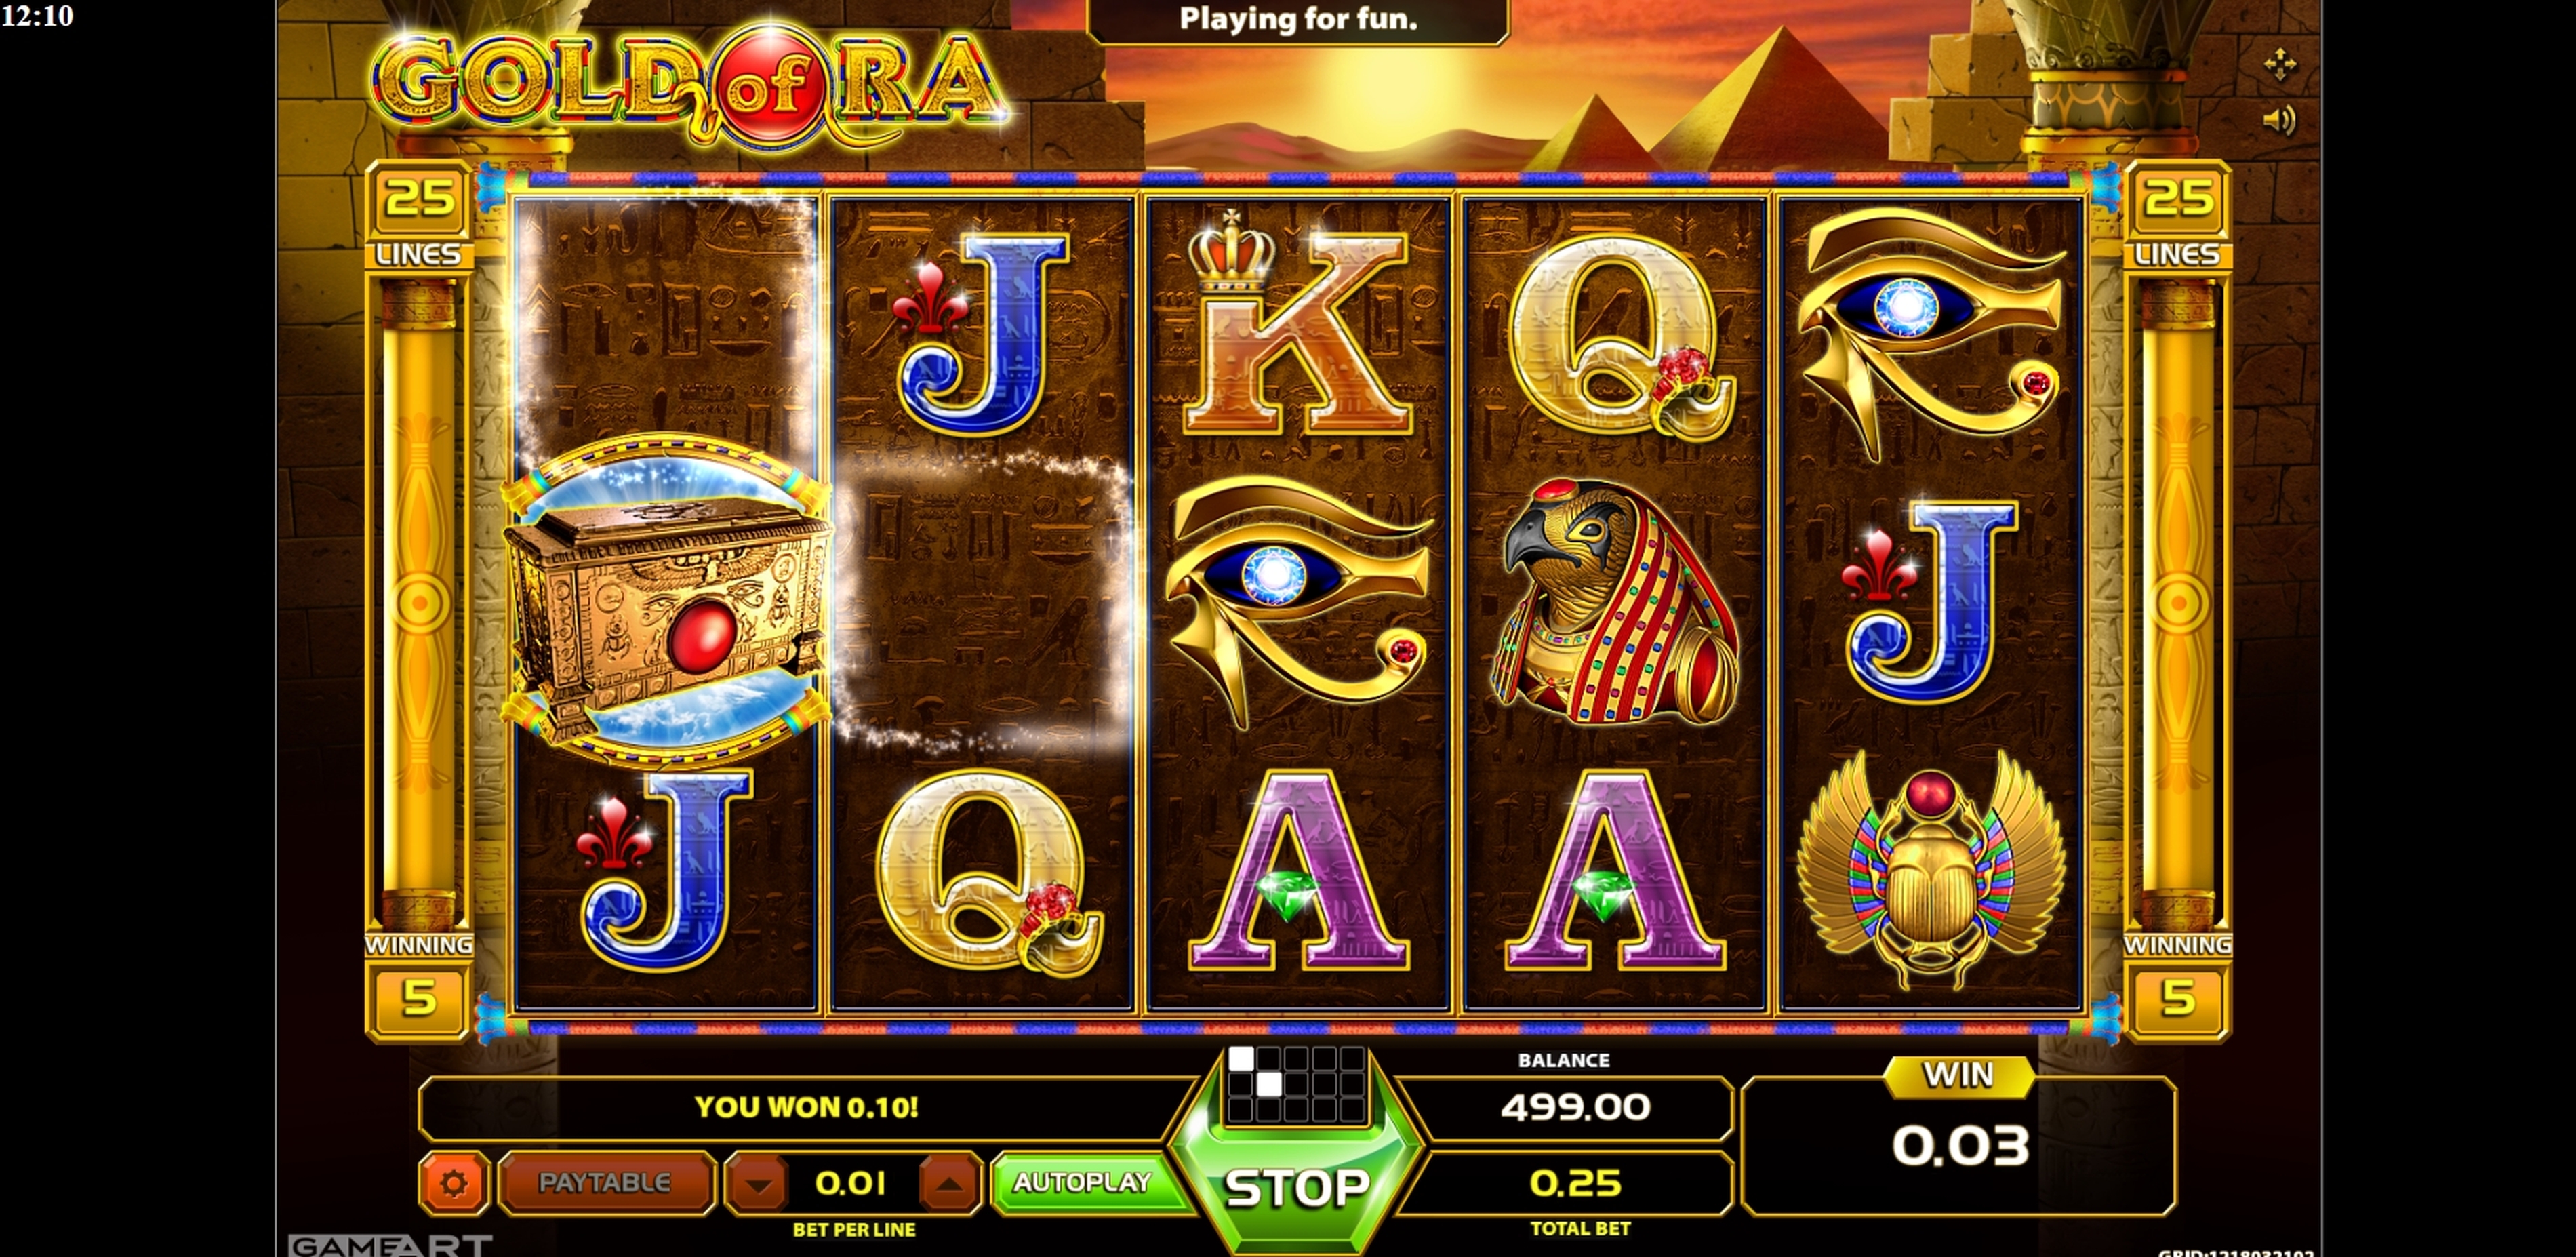 Win Money in Gold Of Ra Free Slot Game by GameArt